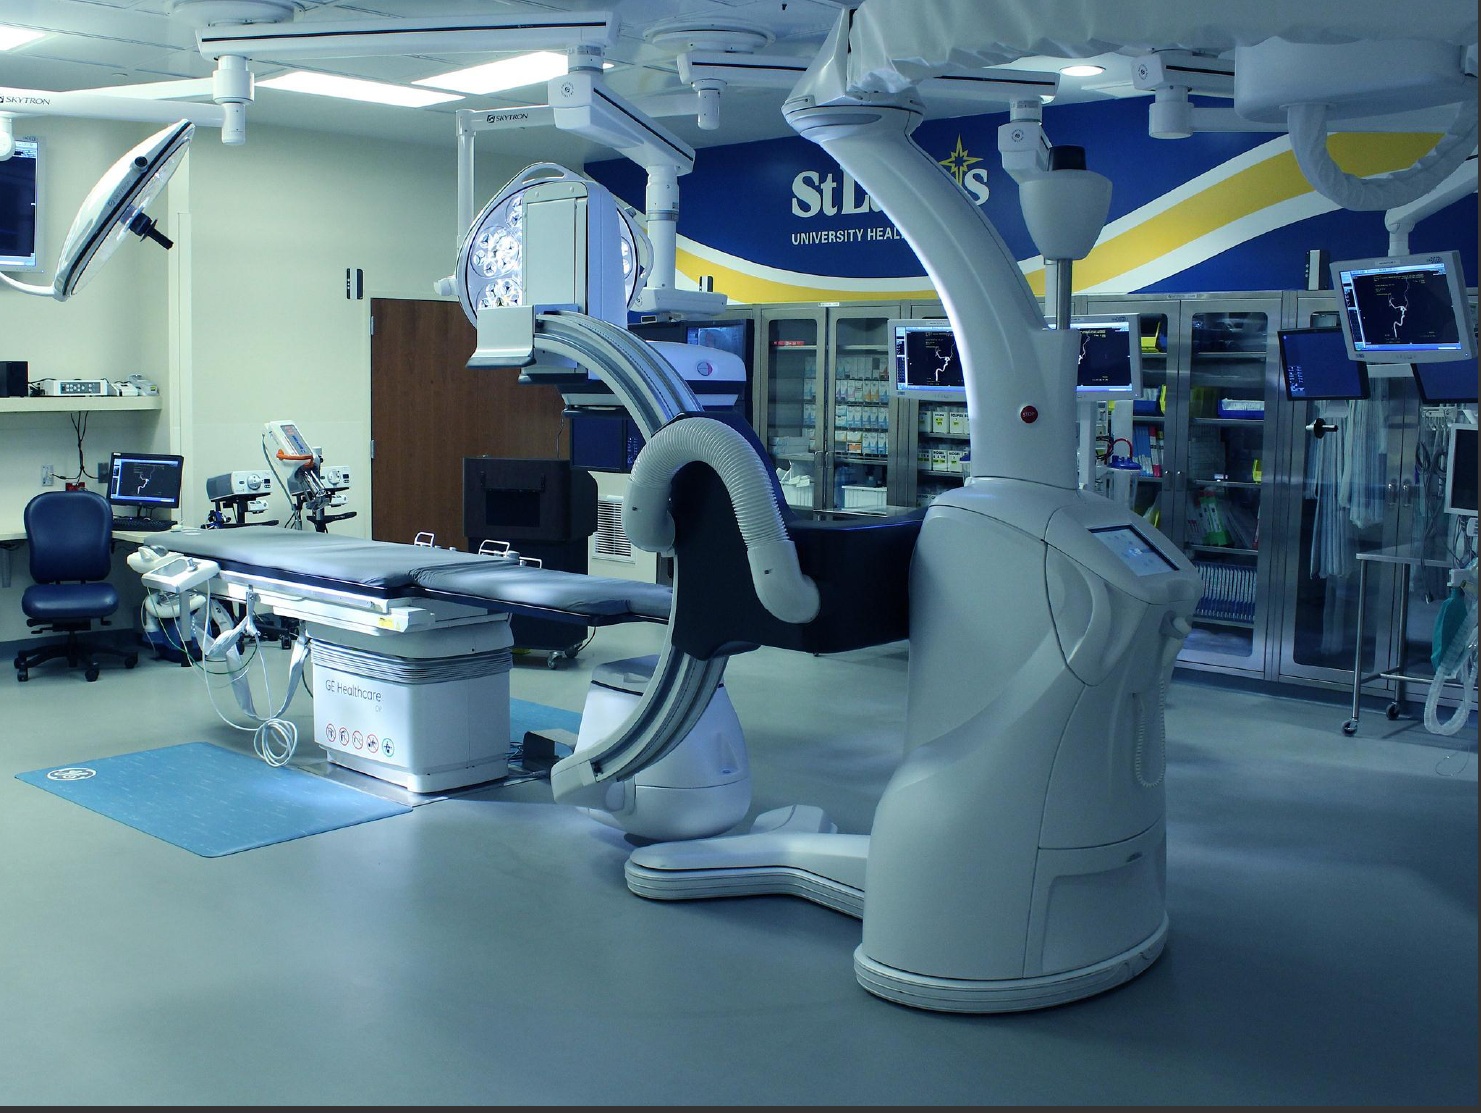 Hybrid-OR-Operating-Room-GE-Discovery-IGS-730-Skytron-LED-Surgical-Lights-Equipment-Booms-PA-26.jpg